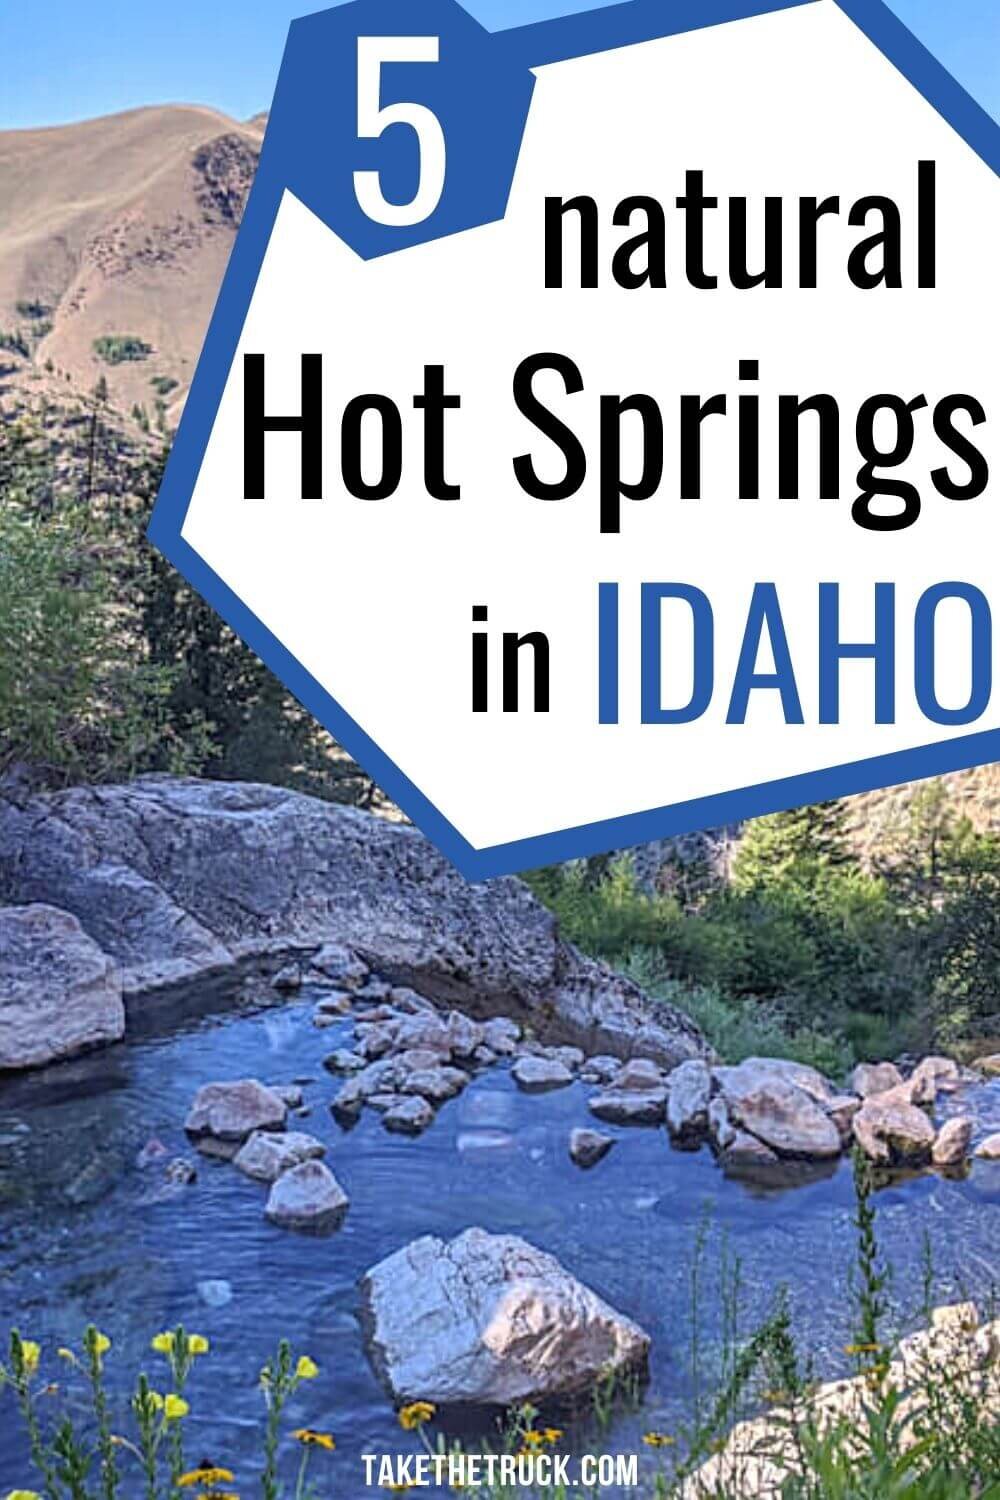 Check out these 5 awesome natural hot springs in Idaho - Sacajawea, Weir Creek, Trail Creek, Rocky Canyon, and Goldbug Hot Springs. Add these hot springs to your Idaho road trip list!